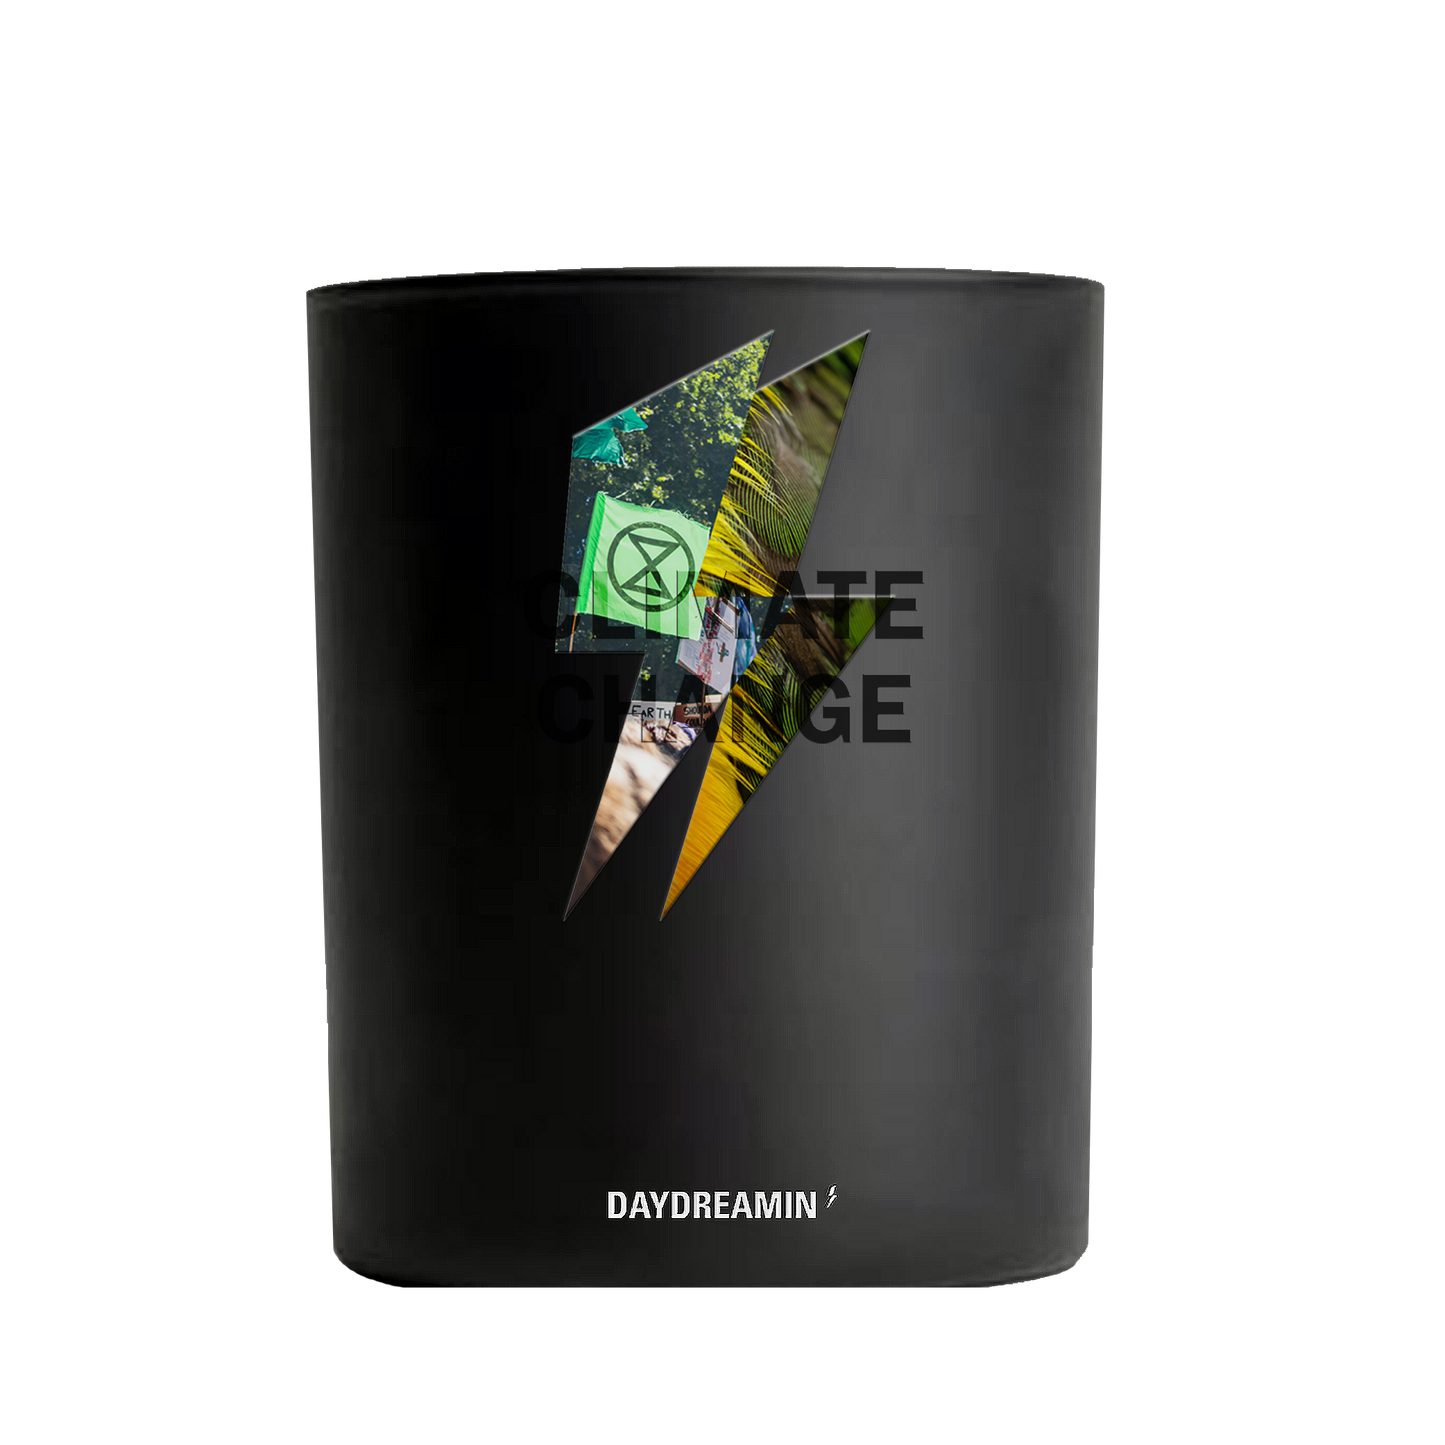 Climate Change Scented Candle by DAYDREAMIN' UK